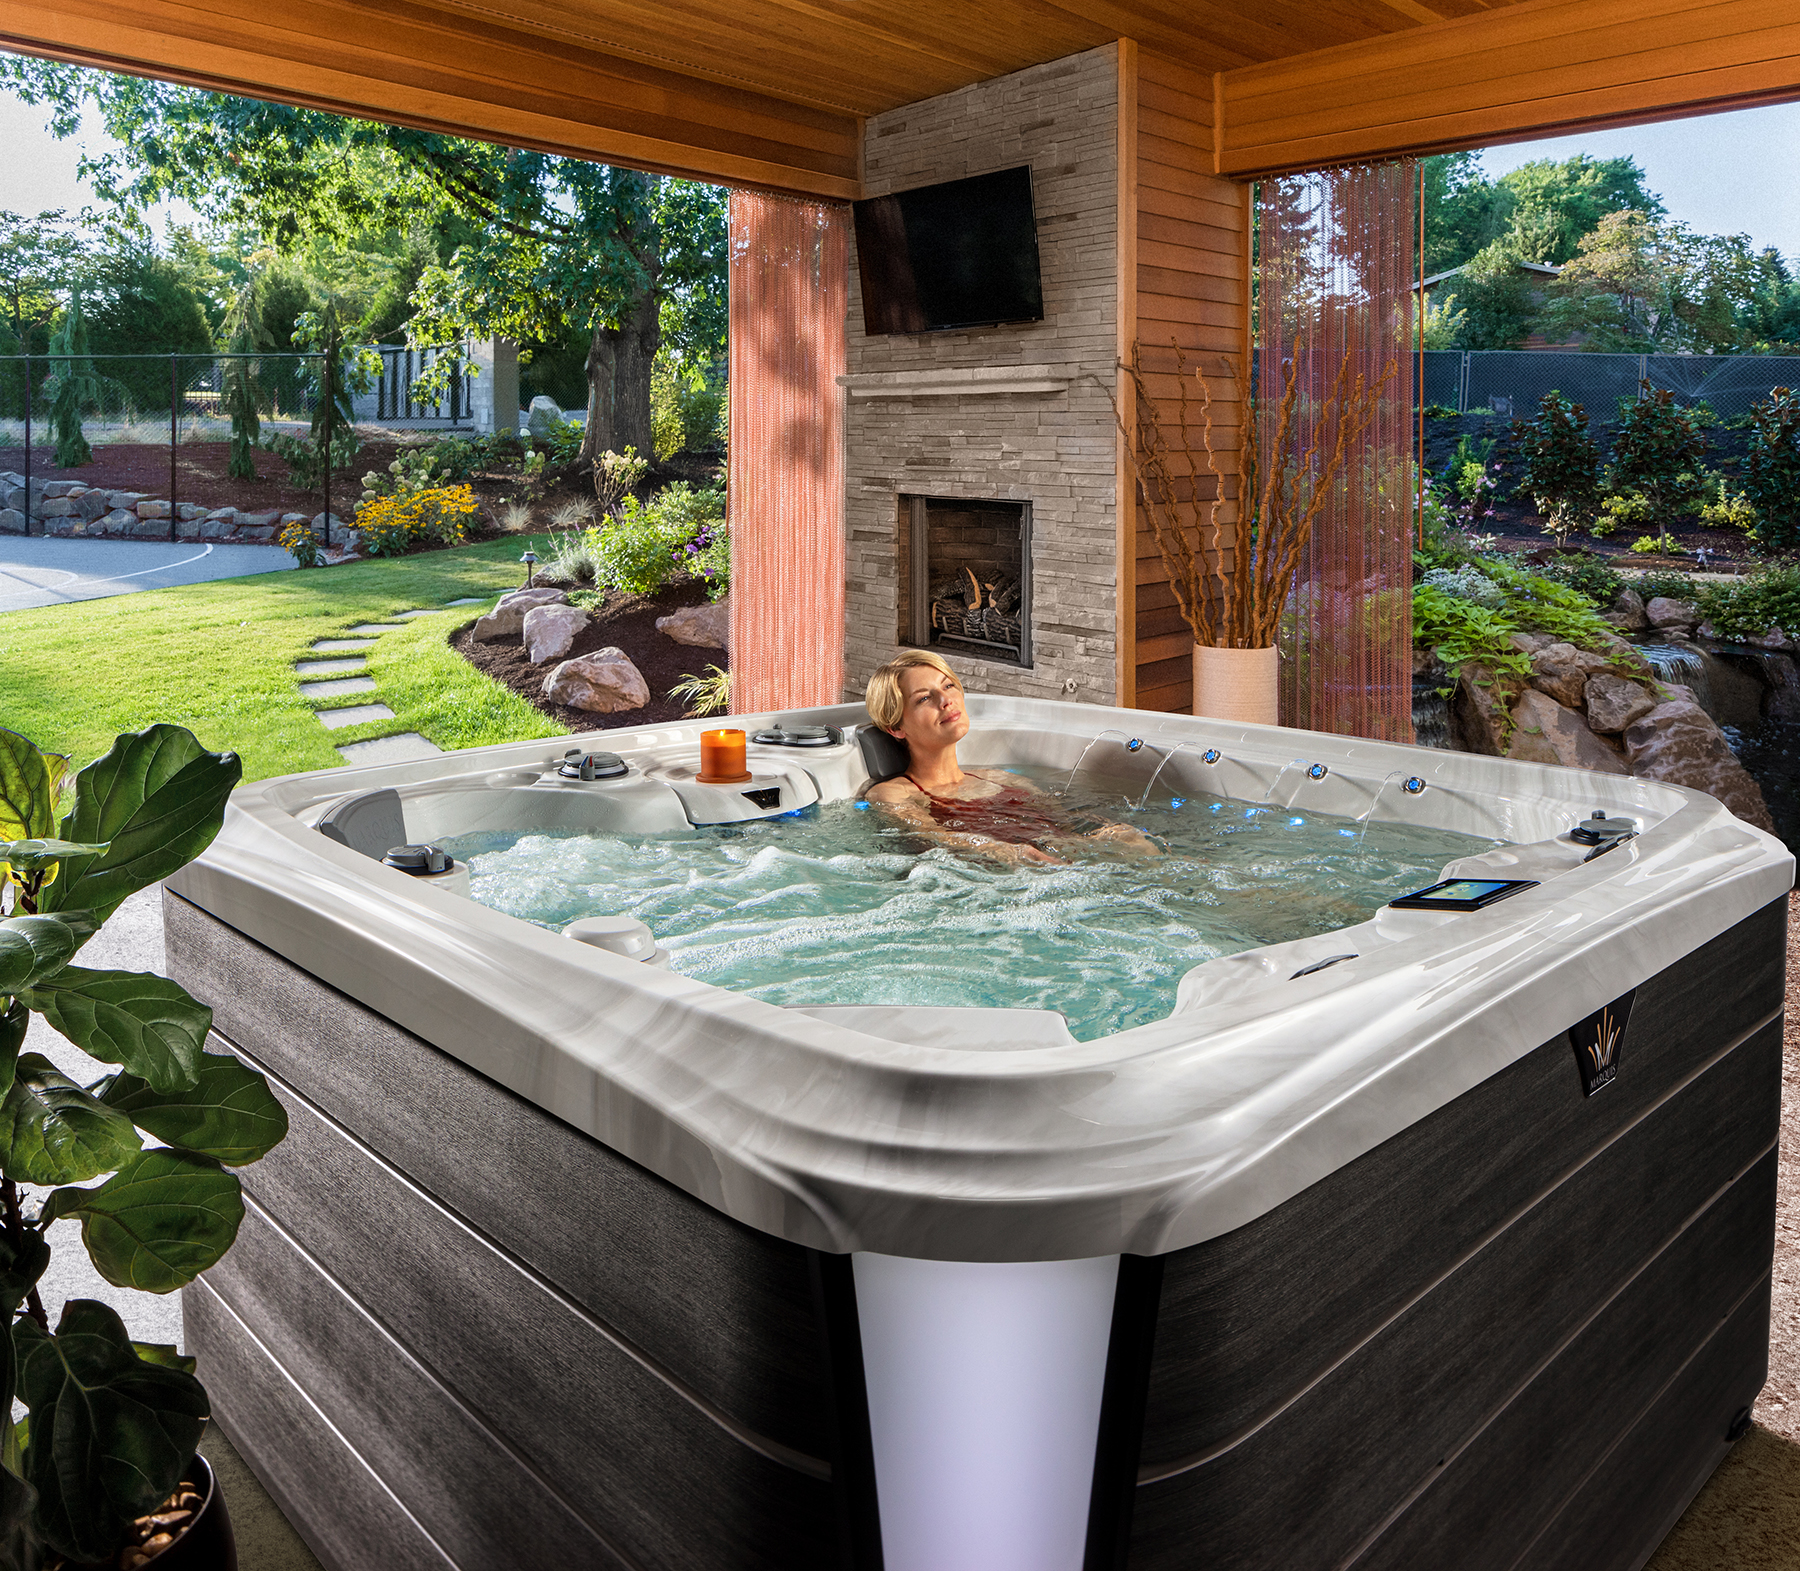 Featured image for “HOW TO GET THE BEST PRICE FOR A HOT TUB OR SWIM SPA”